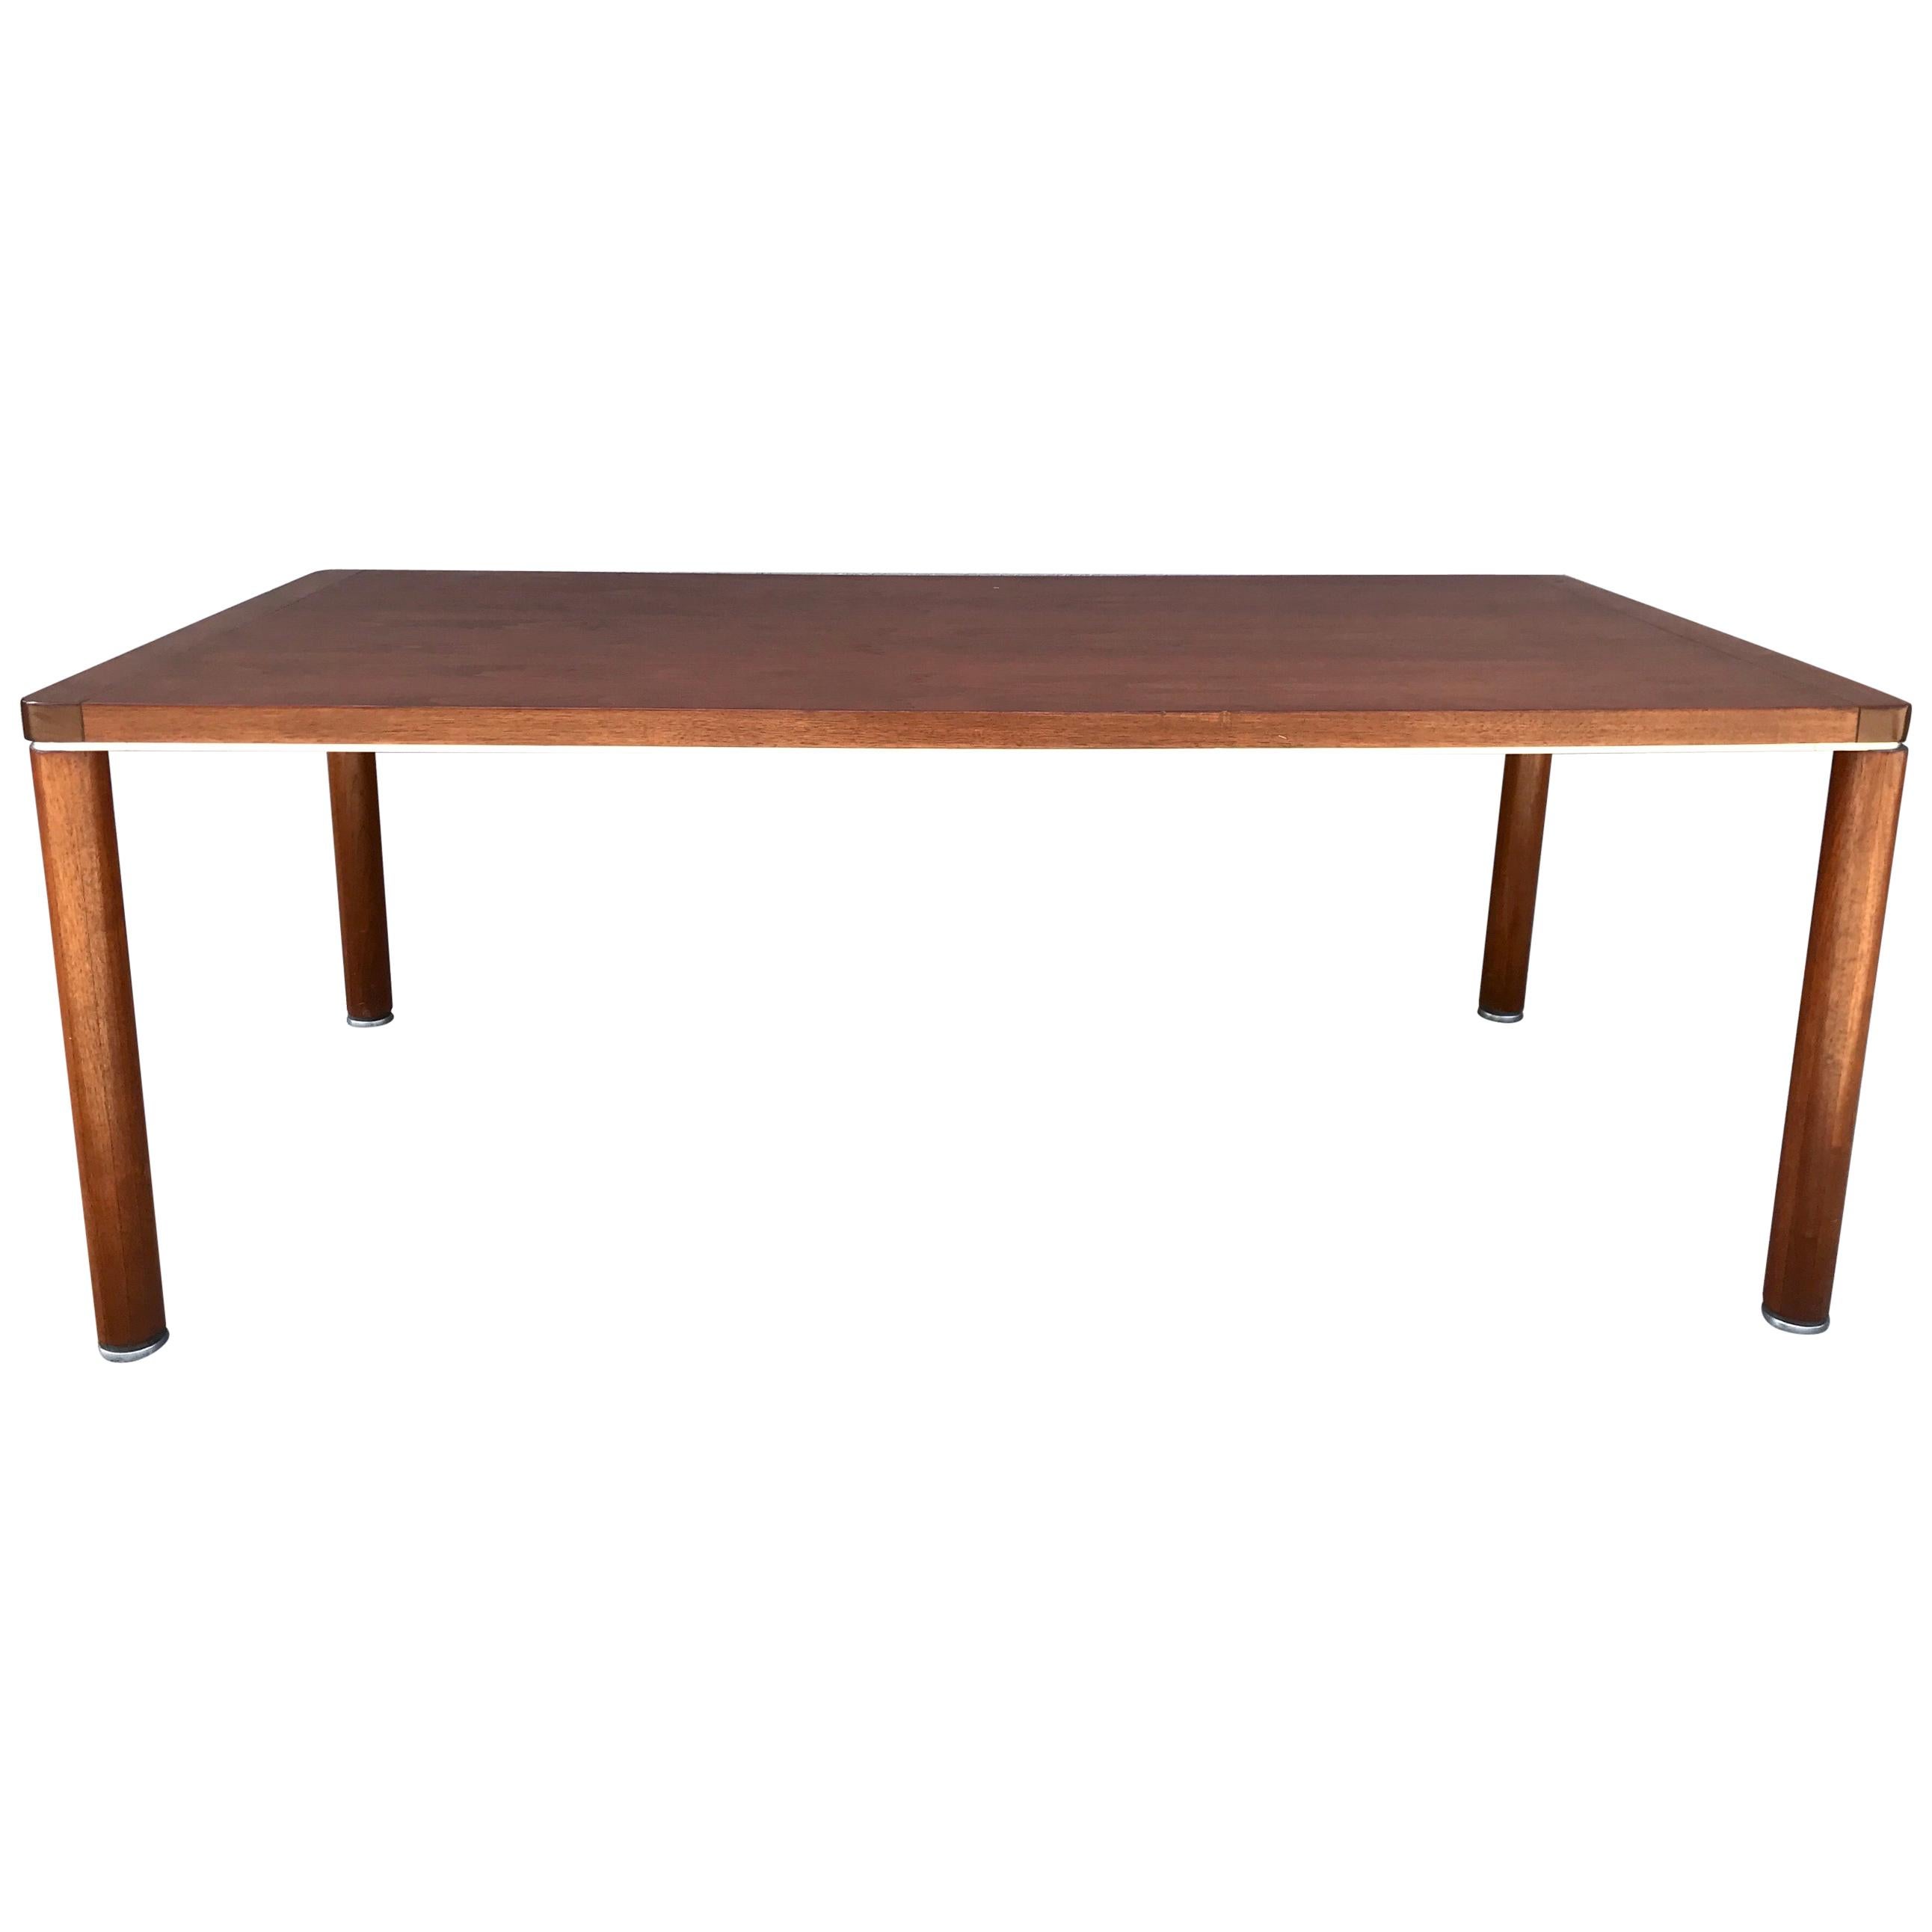 Architectural Studio Design Wood Dining or Work Table, 1970's